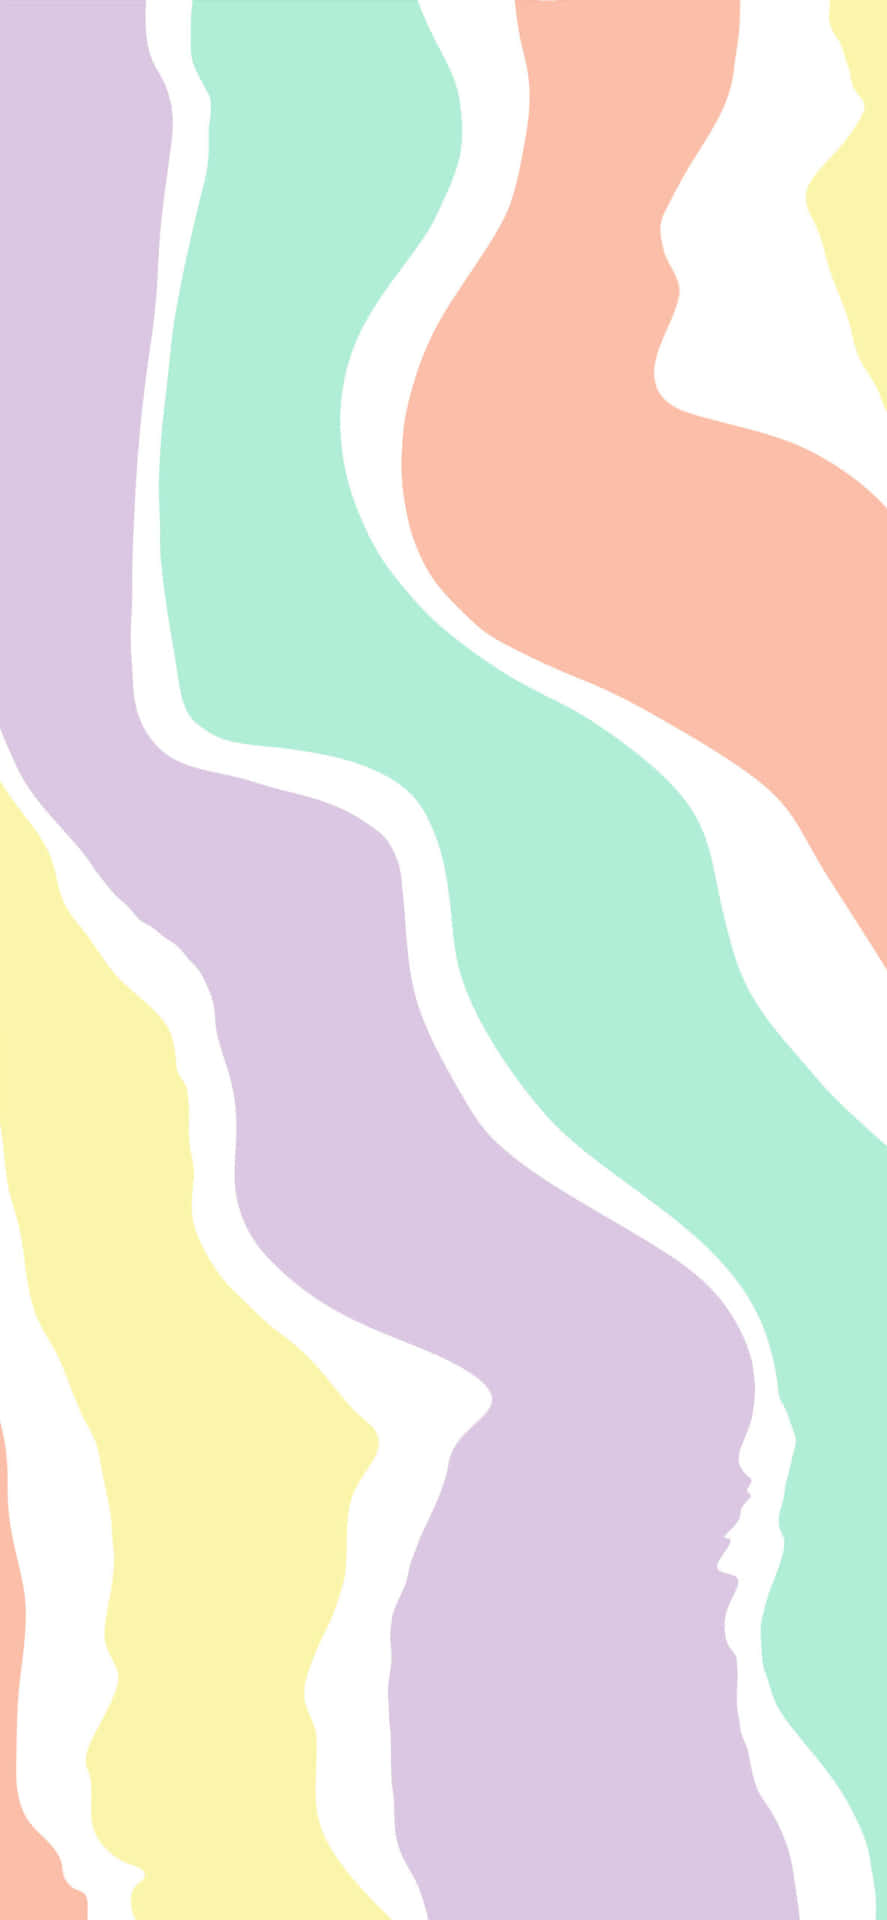 A Colorful Abstract Pattern With Wavy Lines